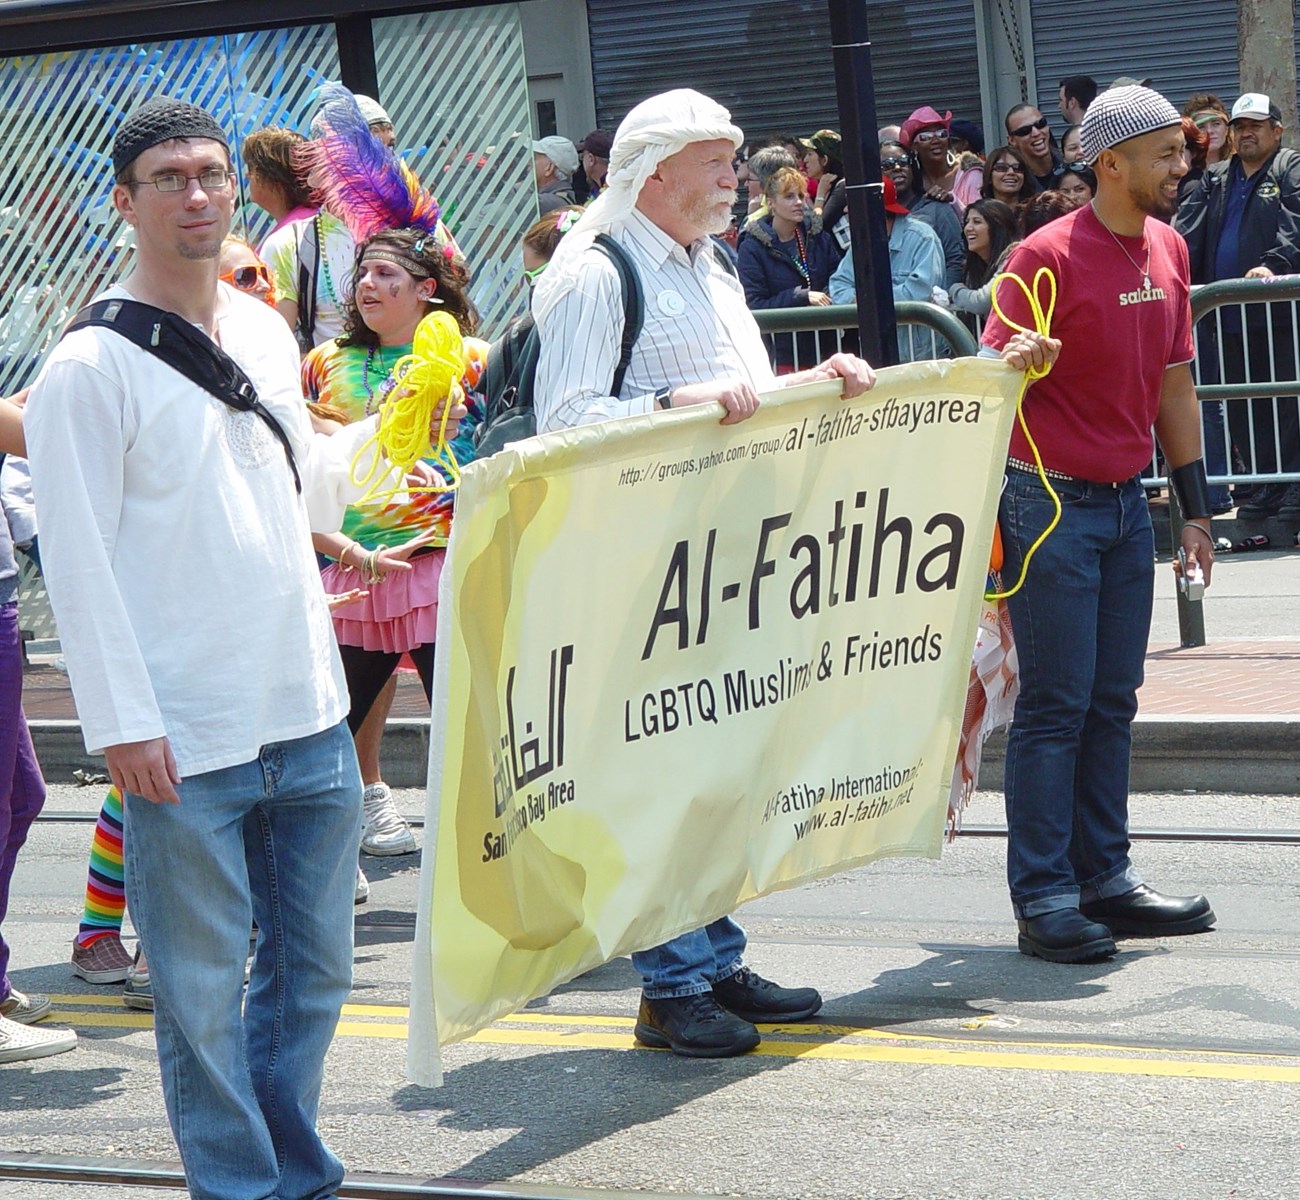 People marching in a Pride Parade. They have a sign that says, "LGBTQ Muslims and Friends."